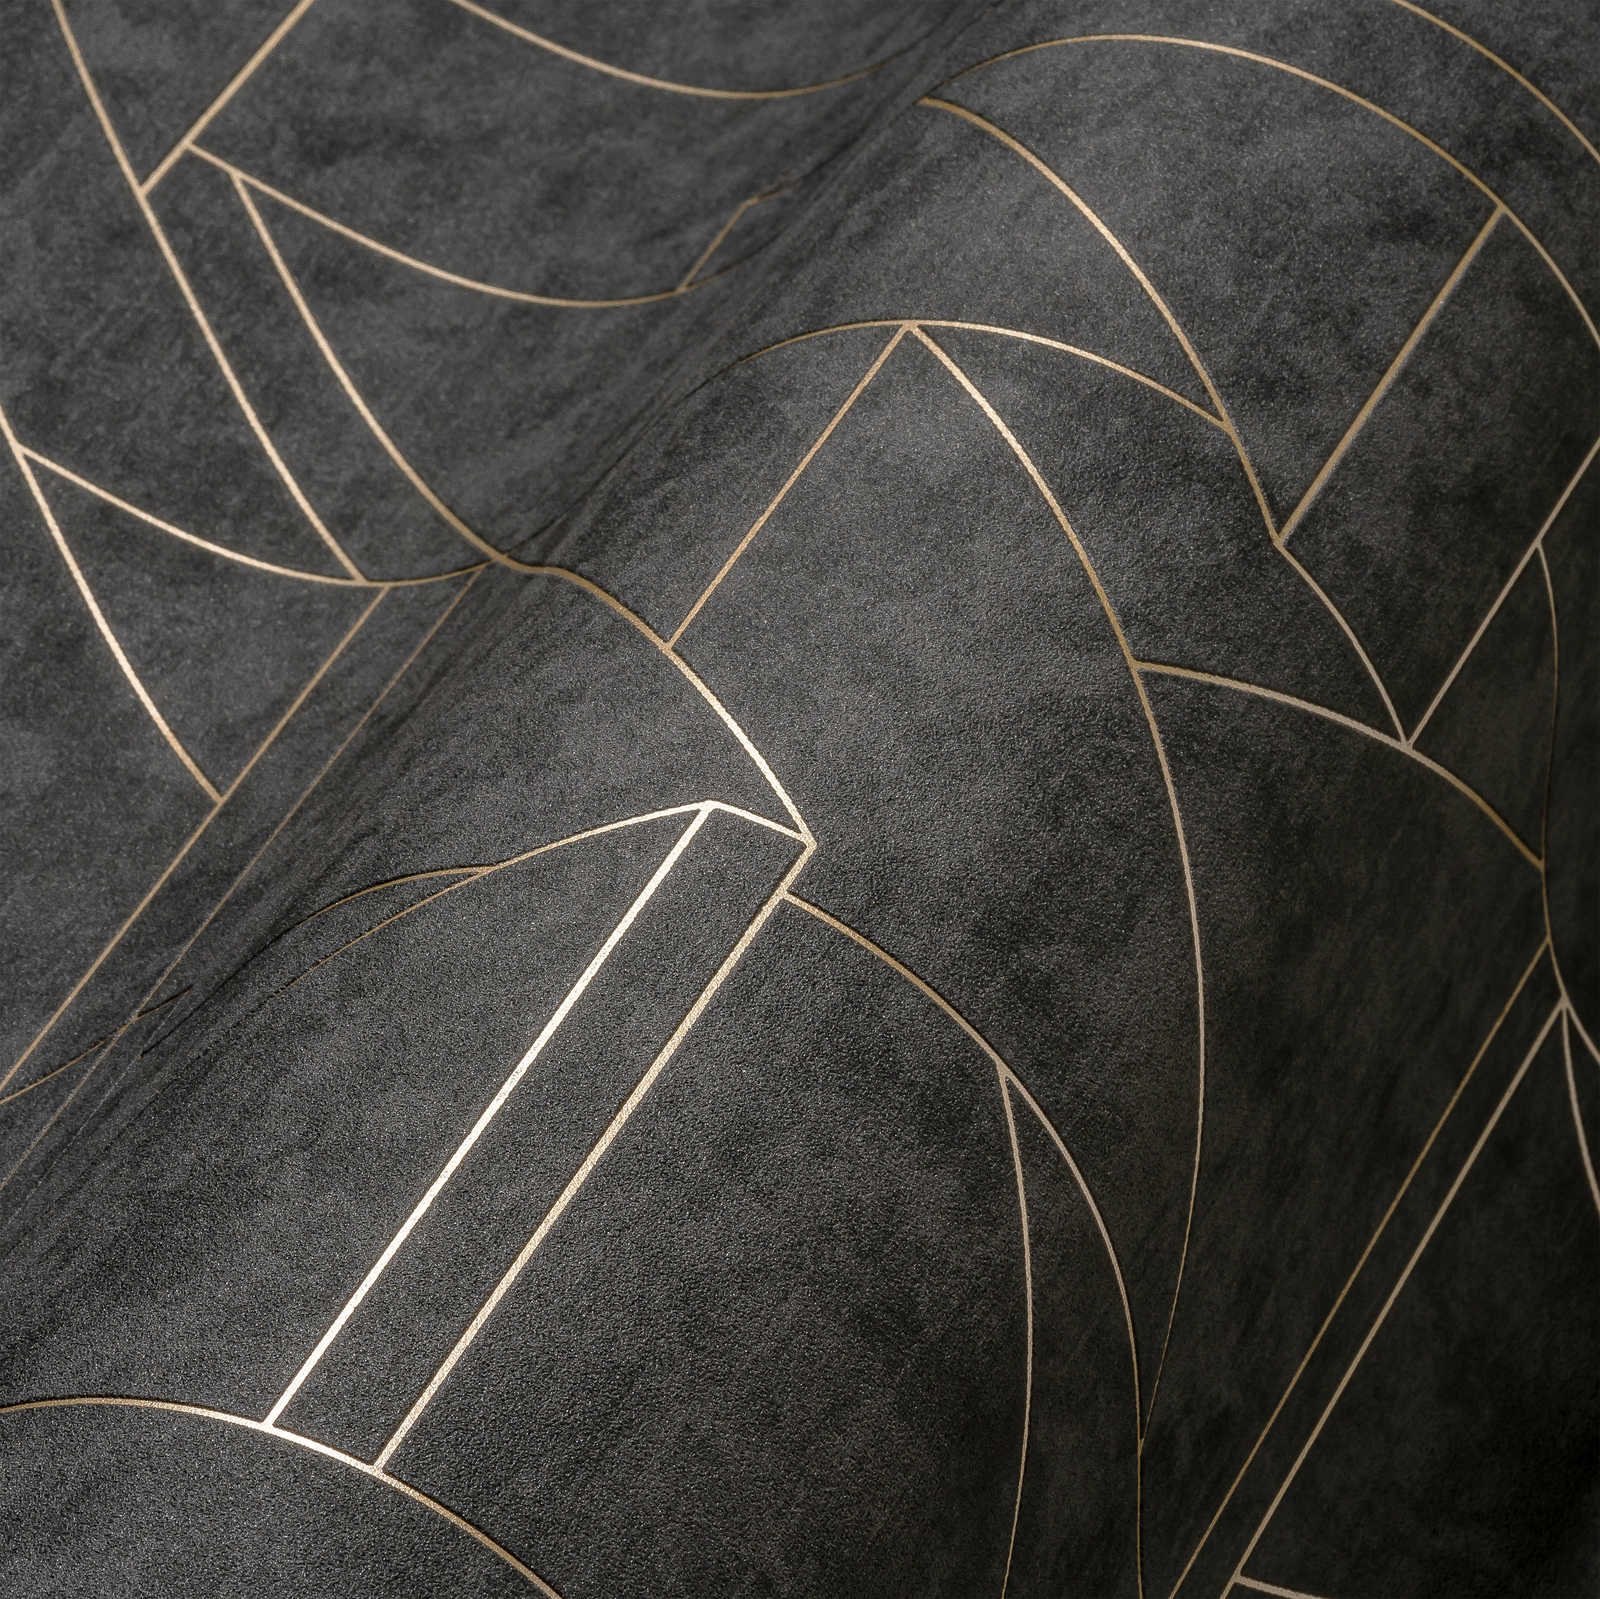             Non-woven wallpaper with discreet line pattern - black, gold
        